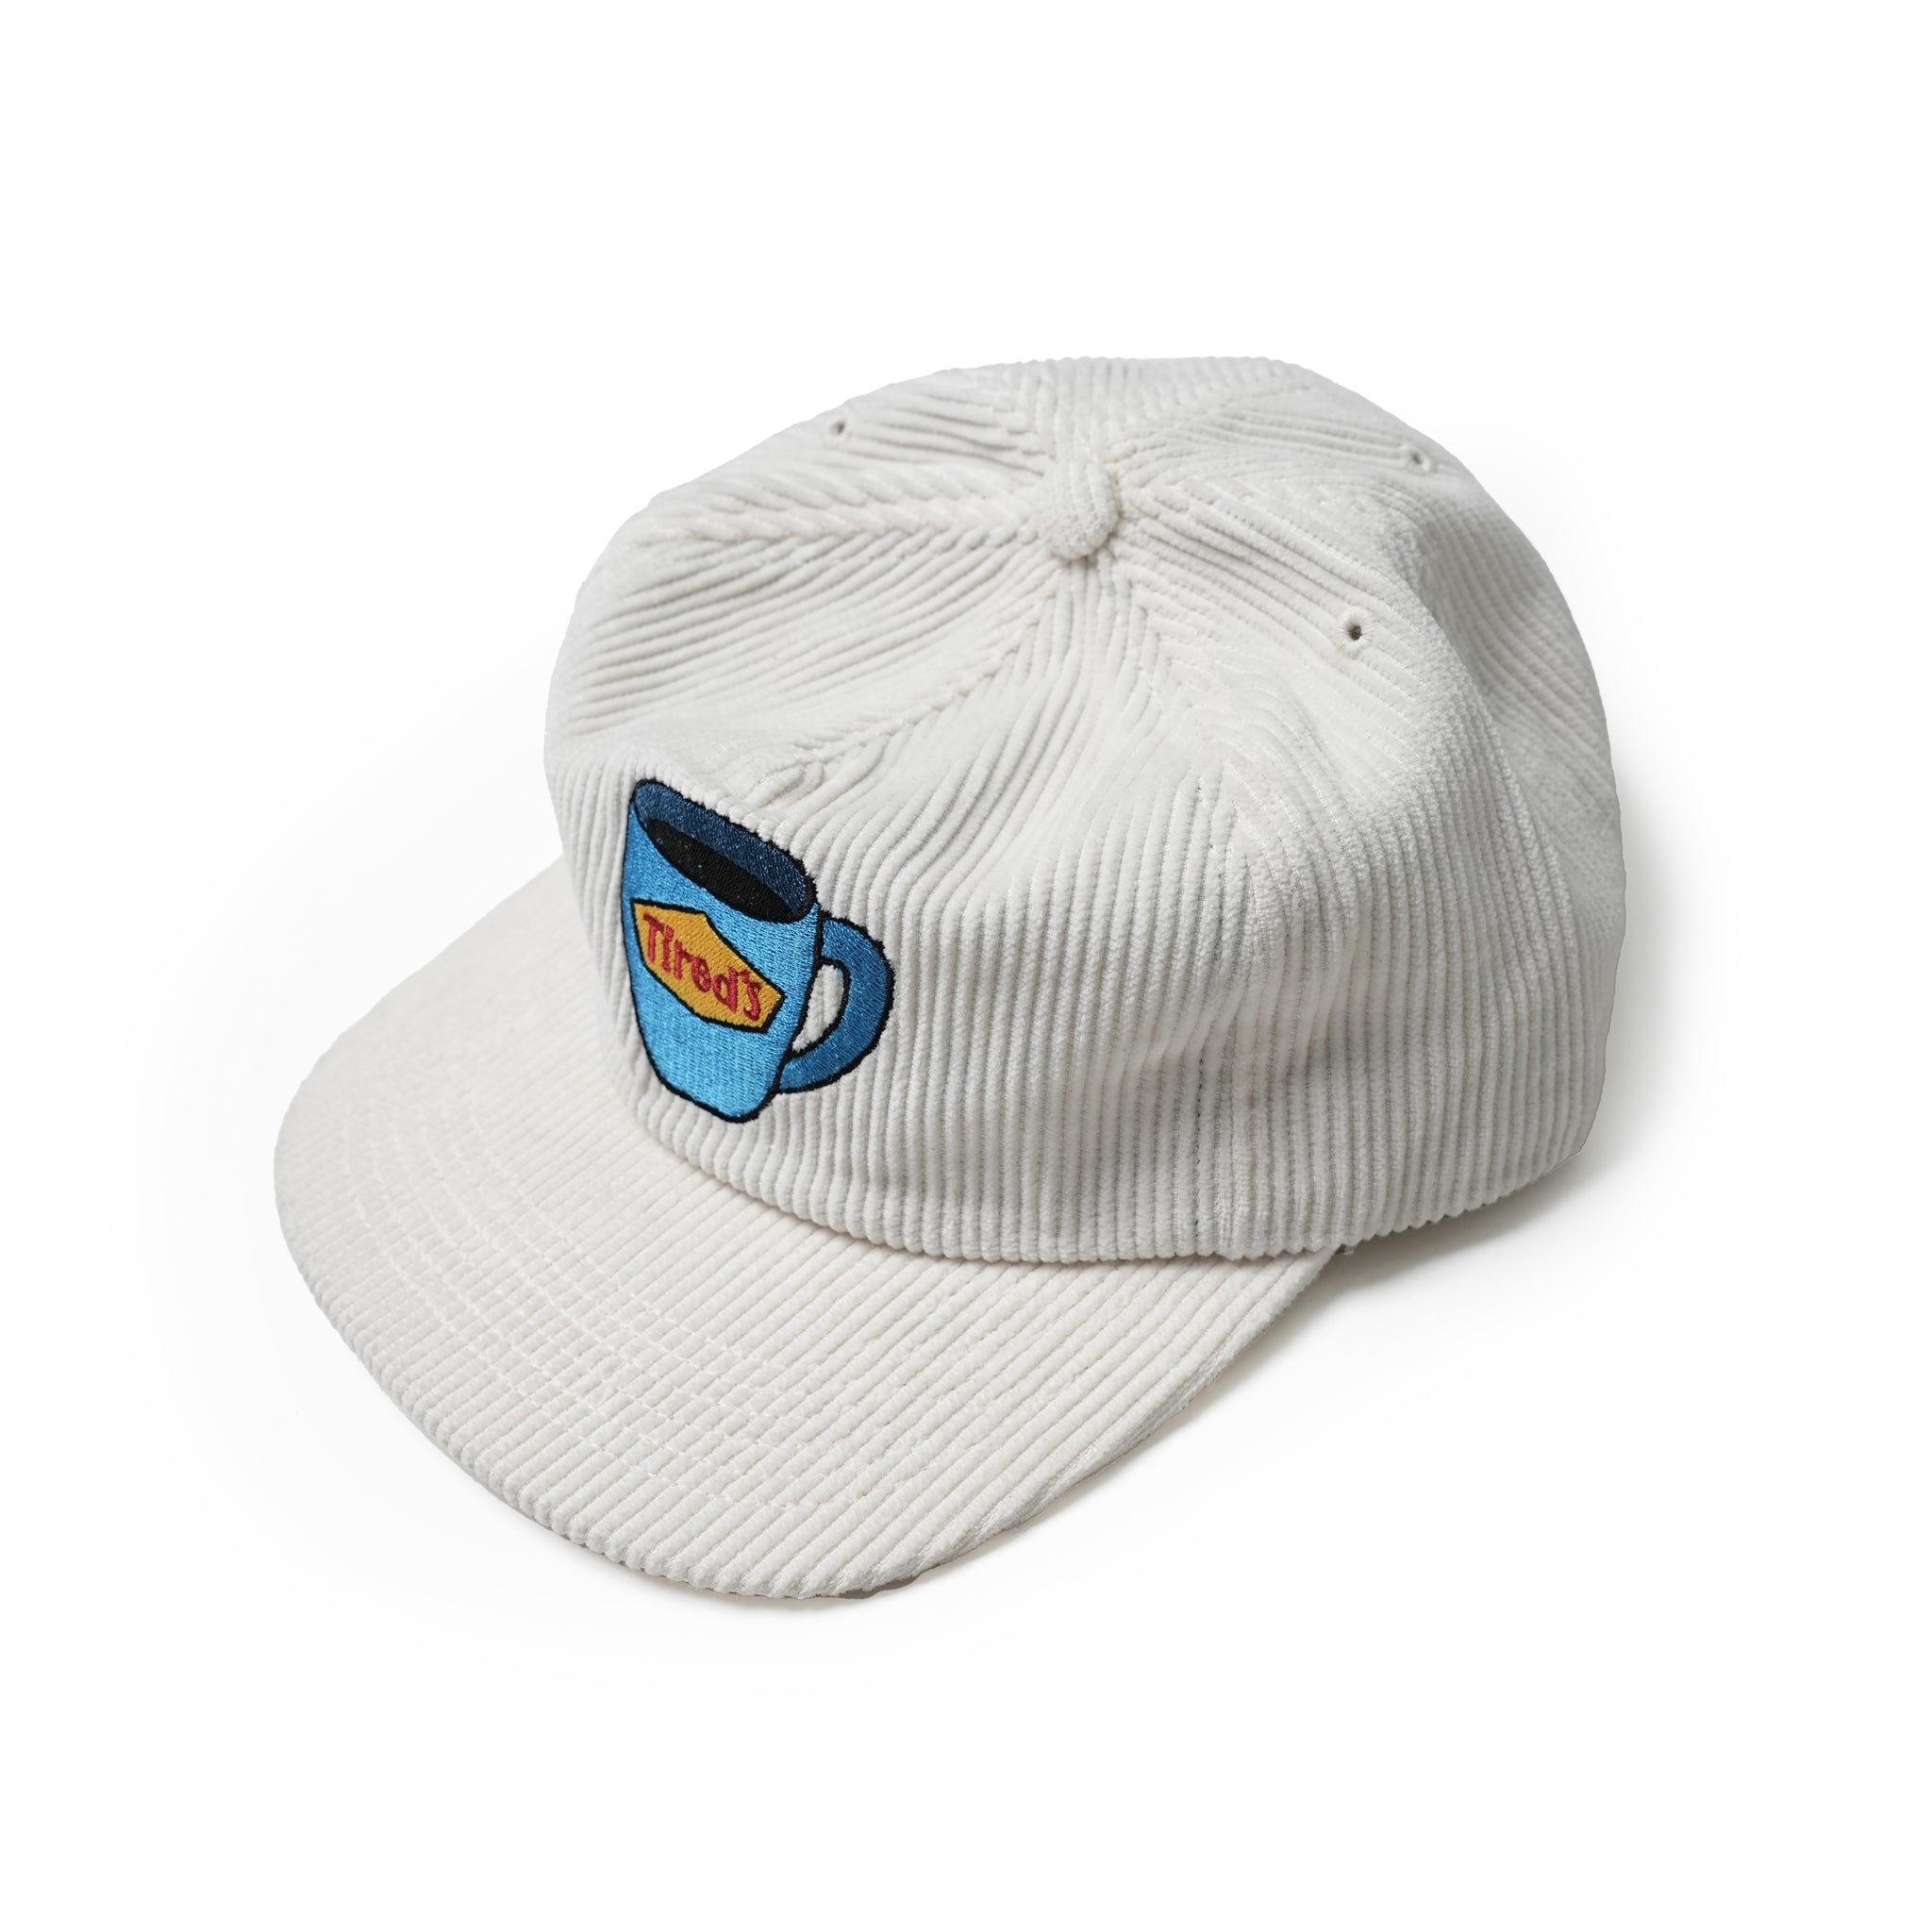 No:TS00362 | Name:TIRED'S WASHED CORD CAP | Color:White【TIRED_タイレッド】